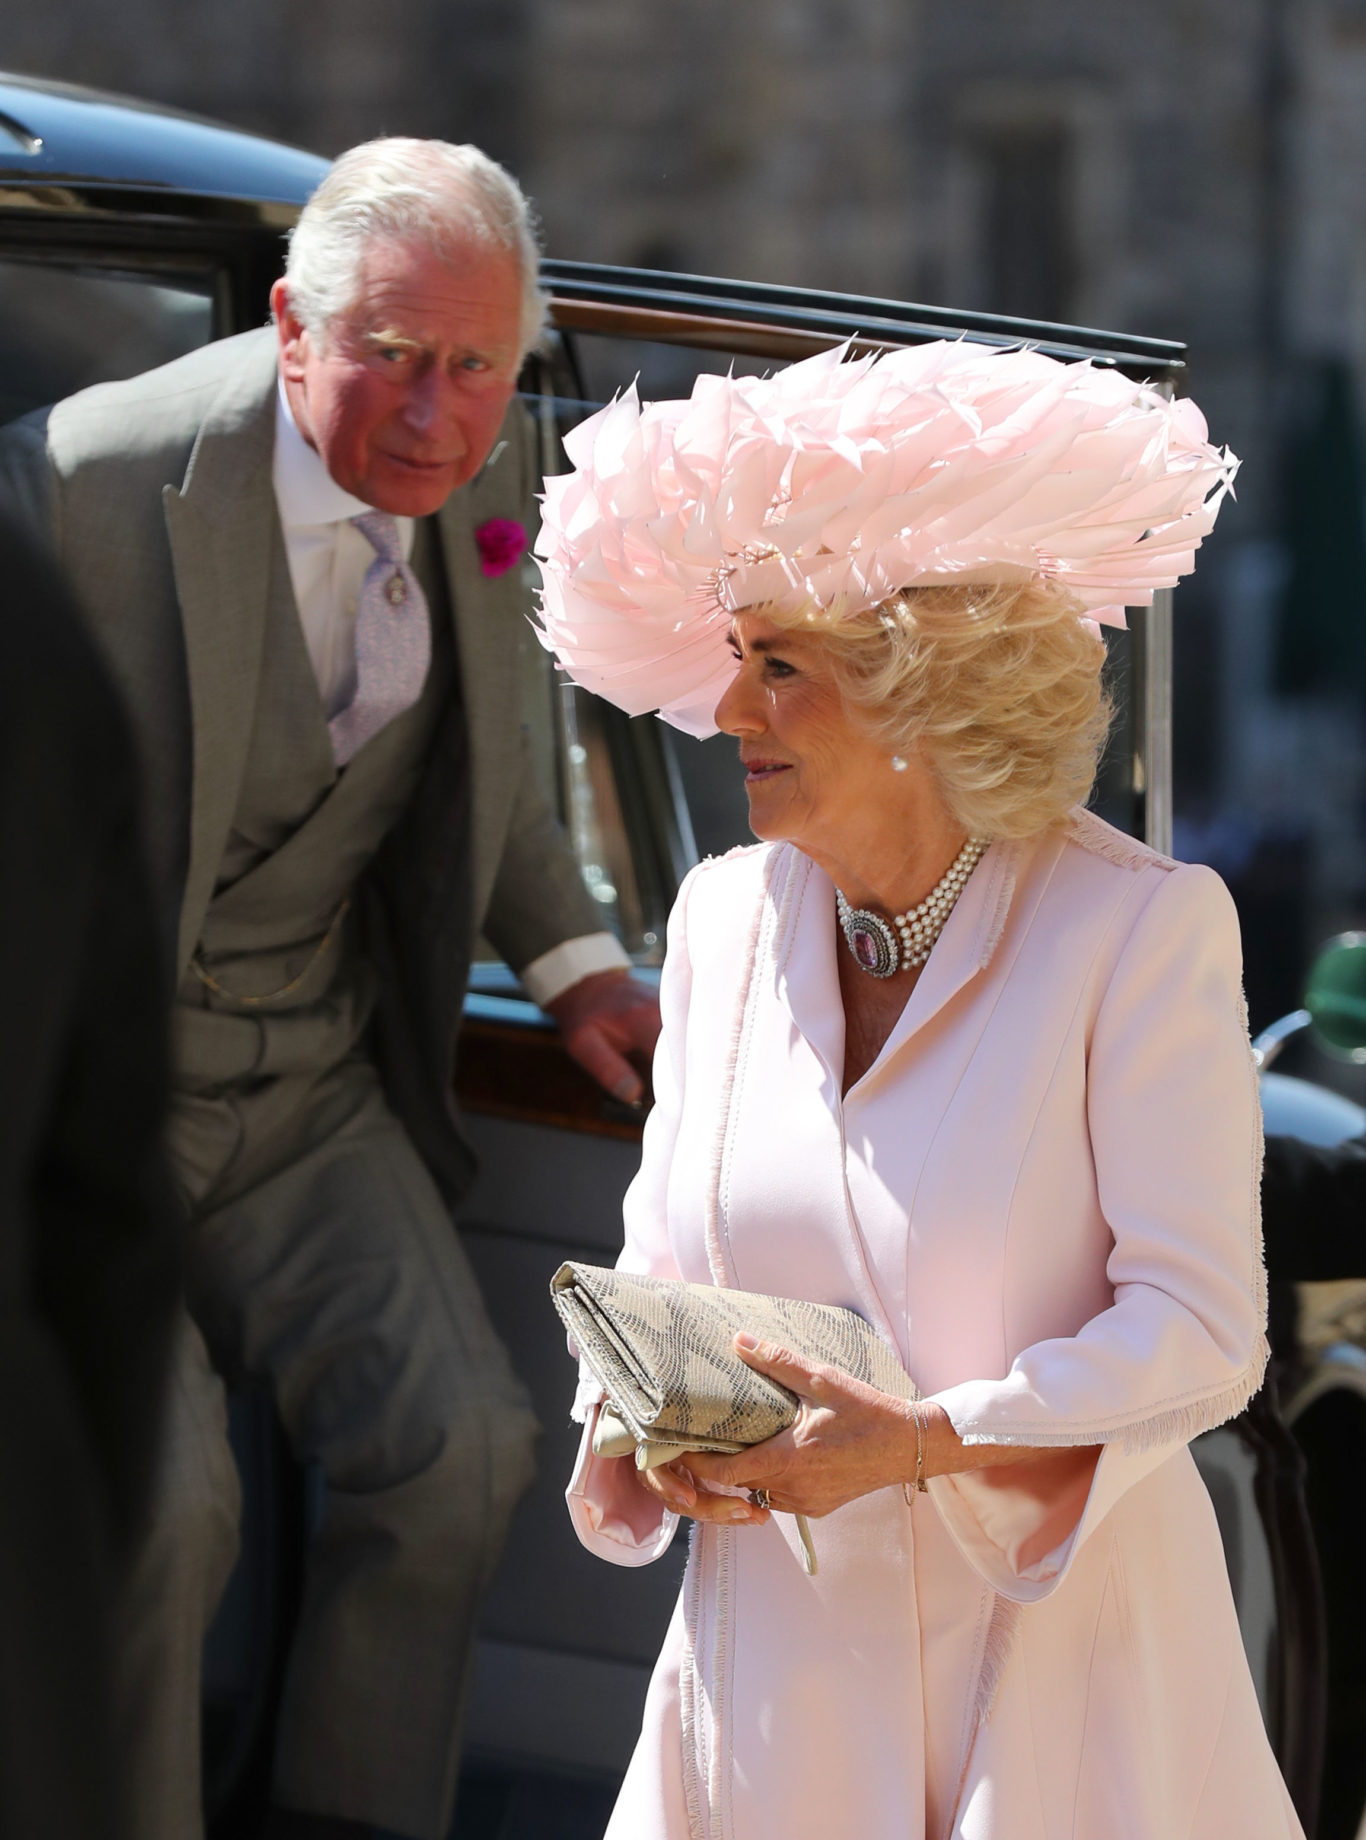 The Prince of Wales and Duchess of Cornwall were among the final guests to arrive (Gareth Fuller/PA)